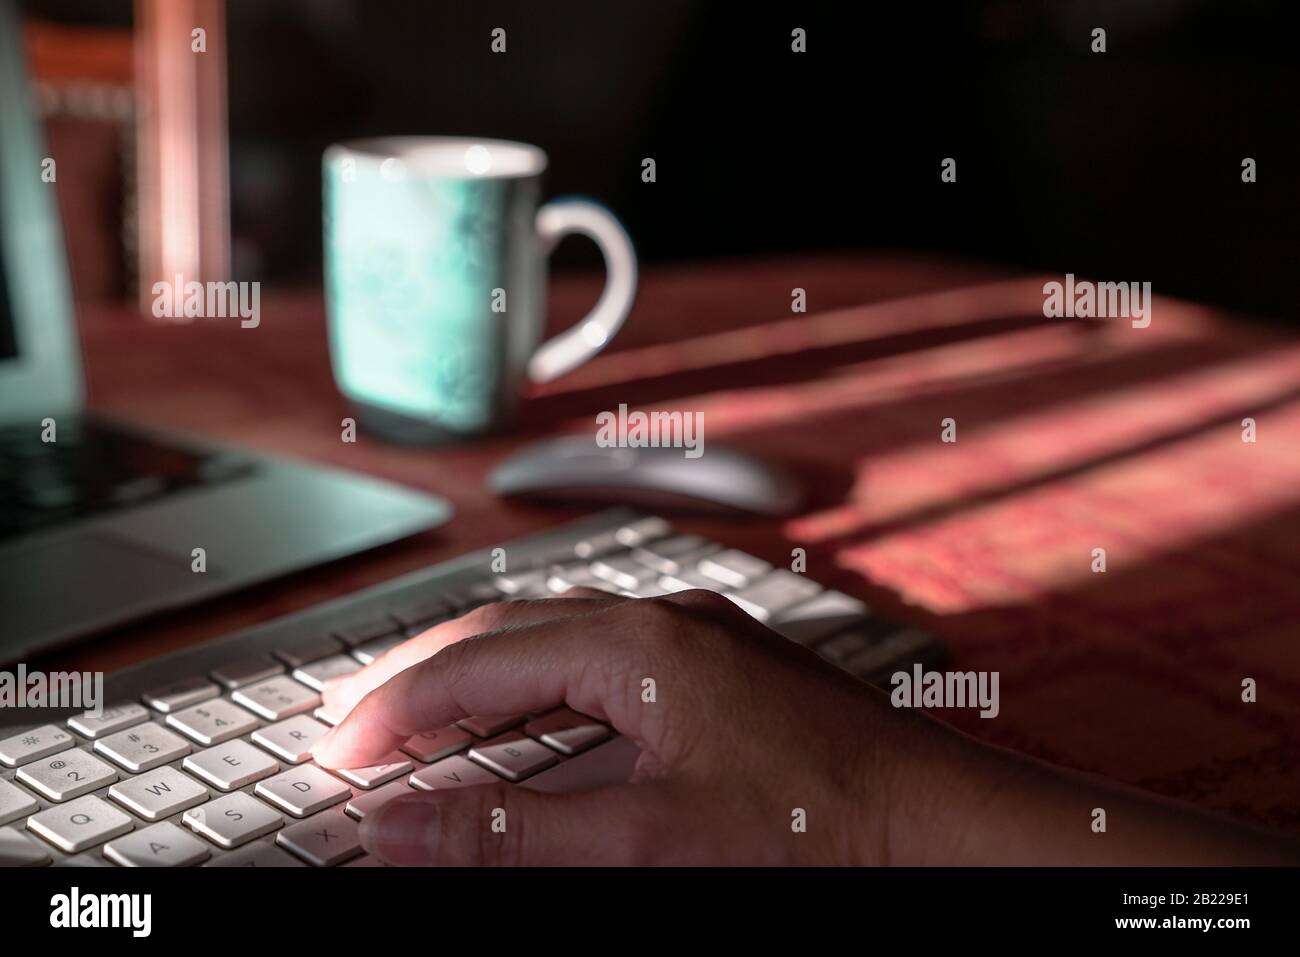 Laptop with hand on wireless keyboard. Work from home or technology concept. Stock Photo